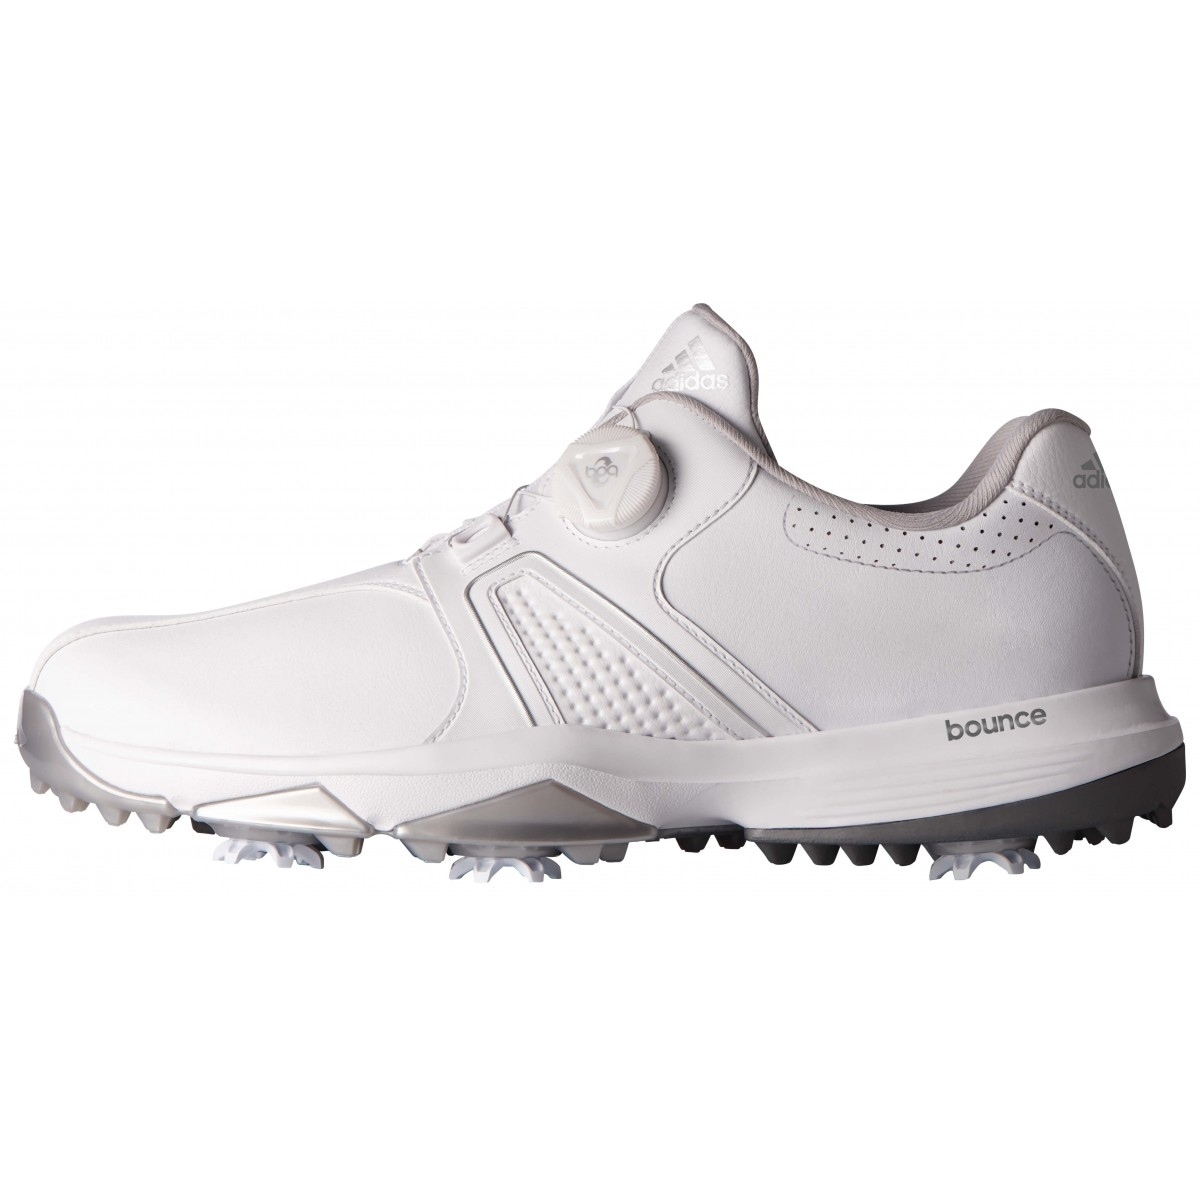 adidas men's 360 traxion golf shoes review